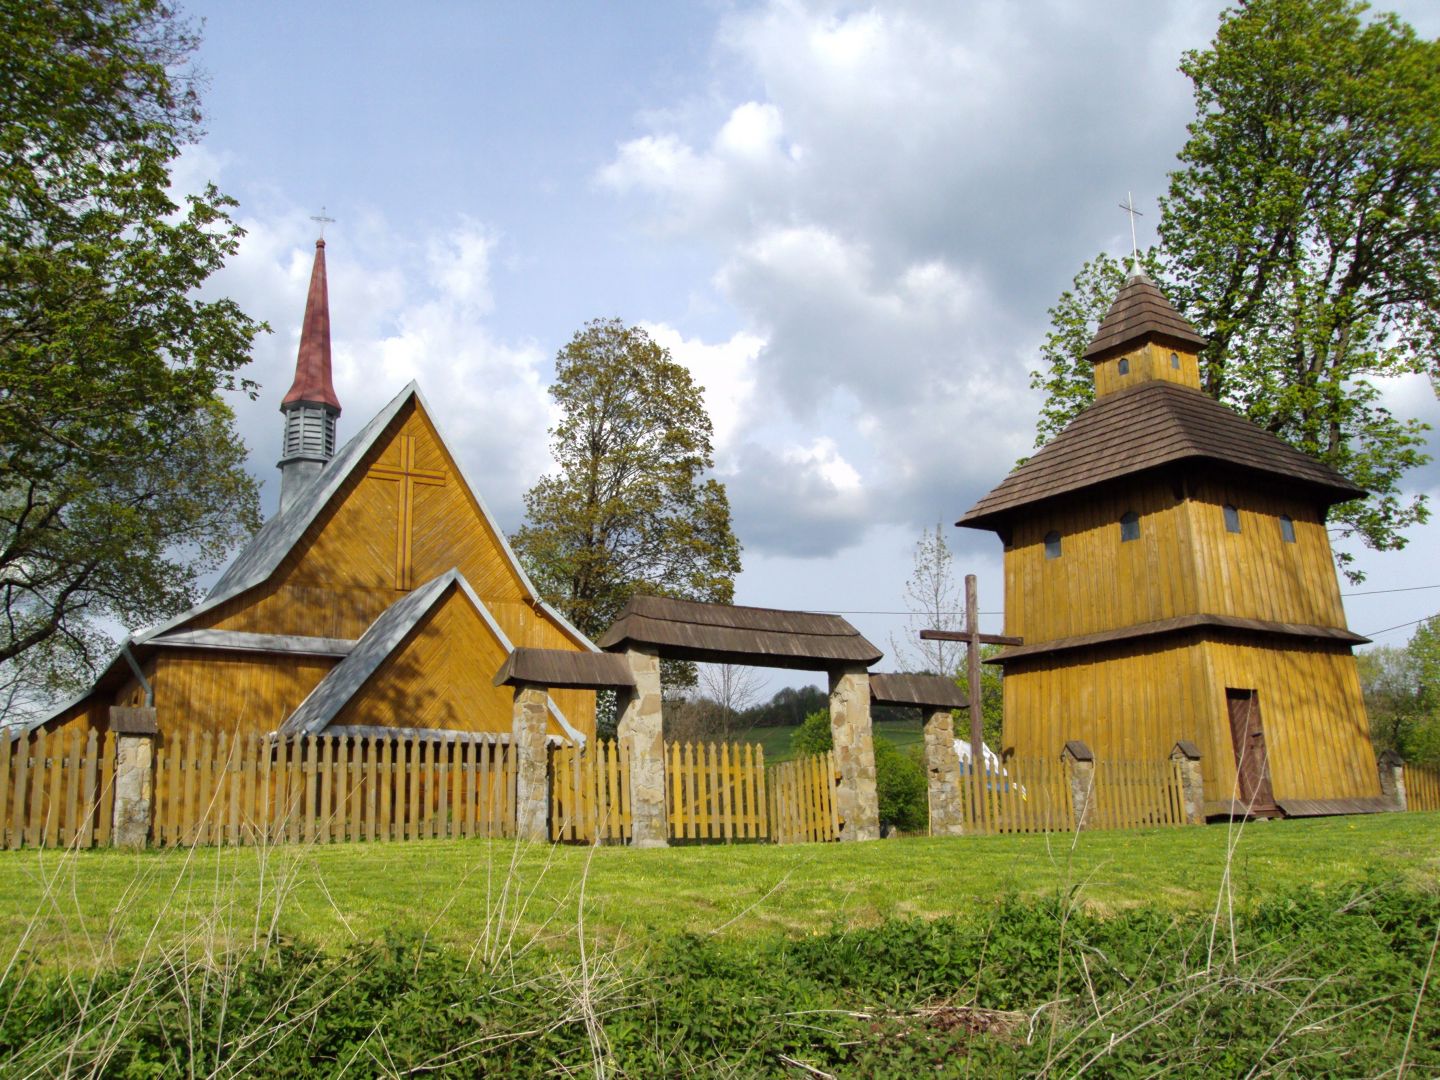 Historic wooden church building